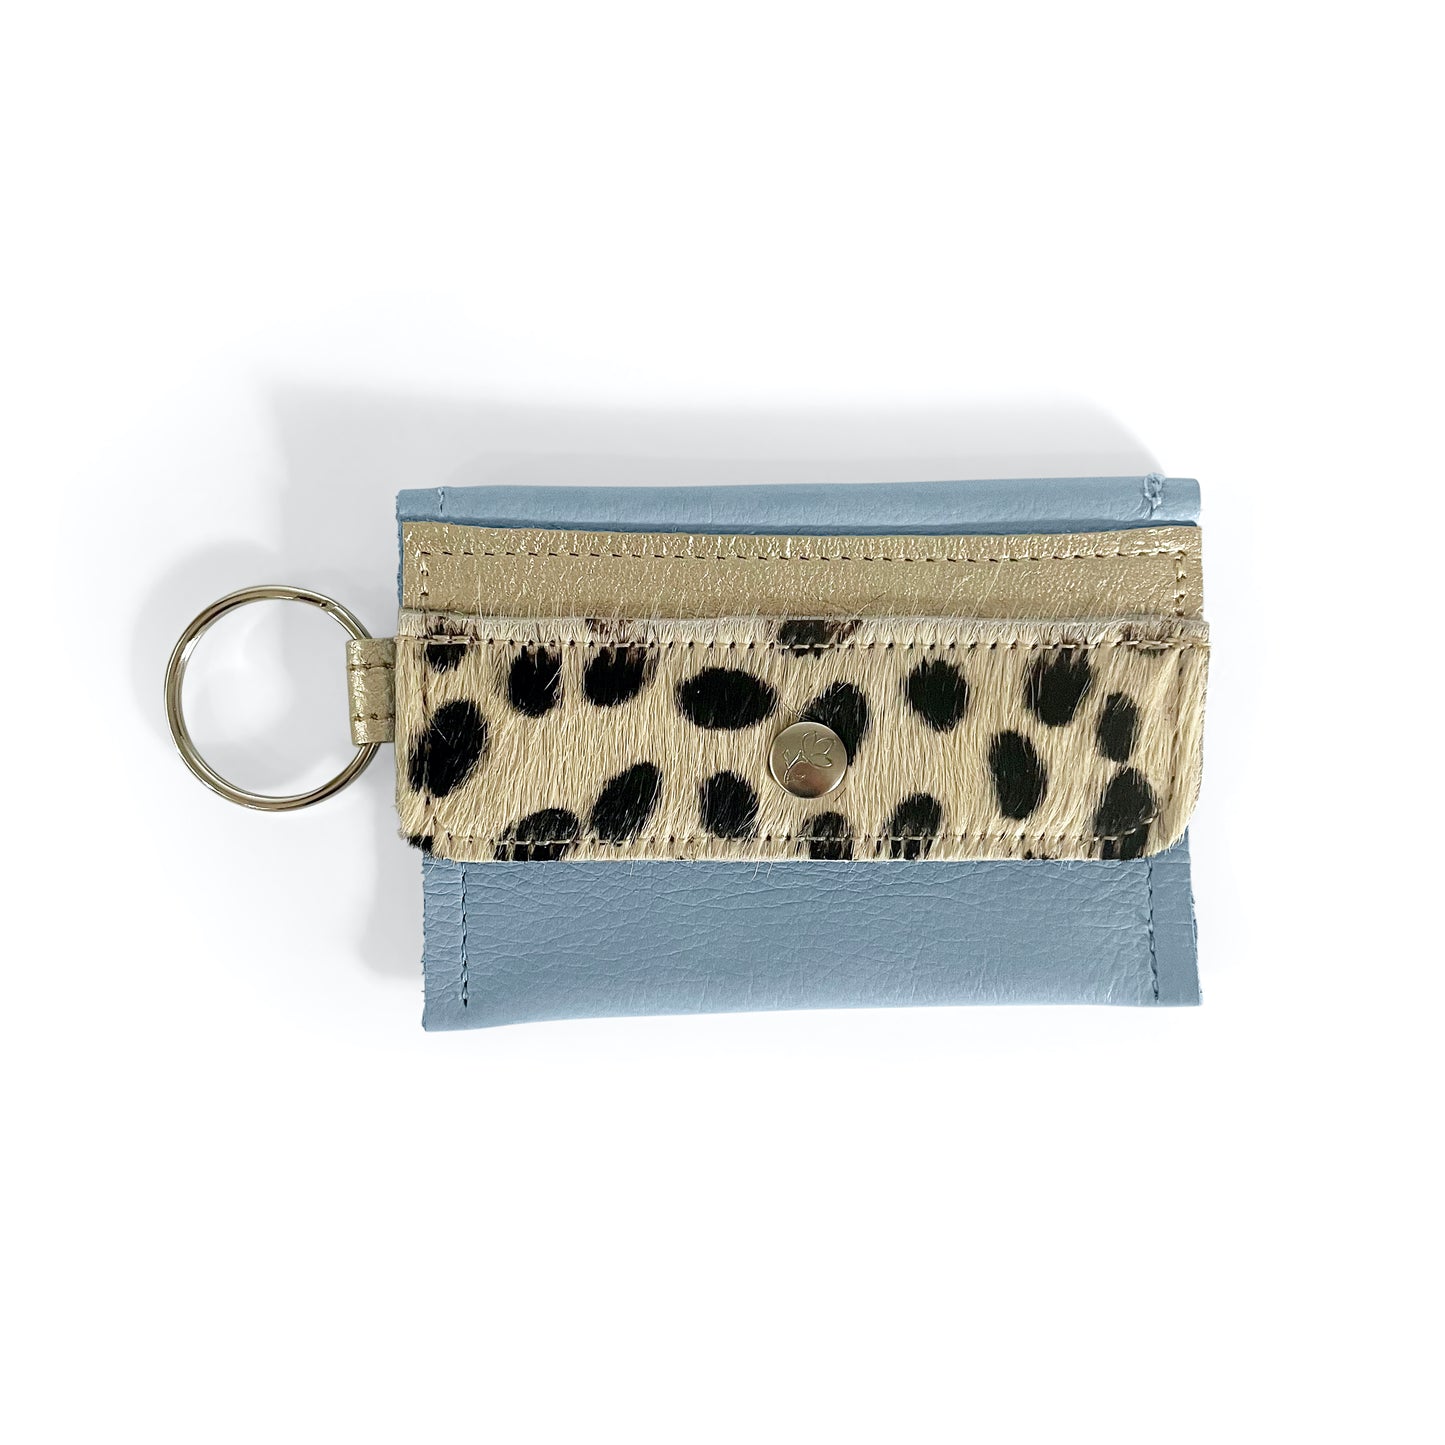 Keychain Wallet - Cowhide & Leather